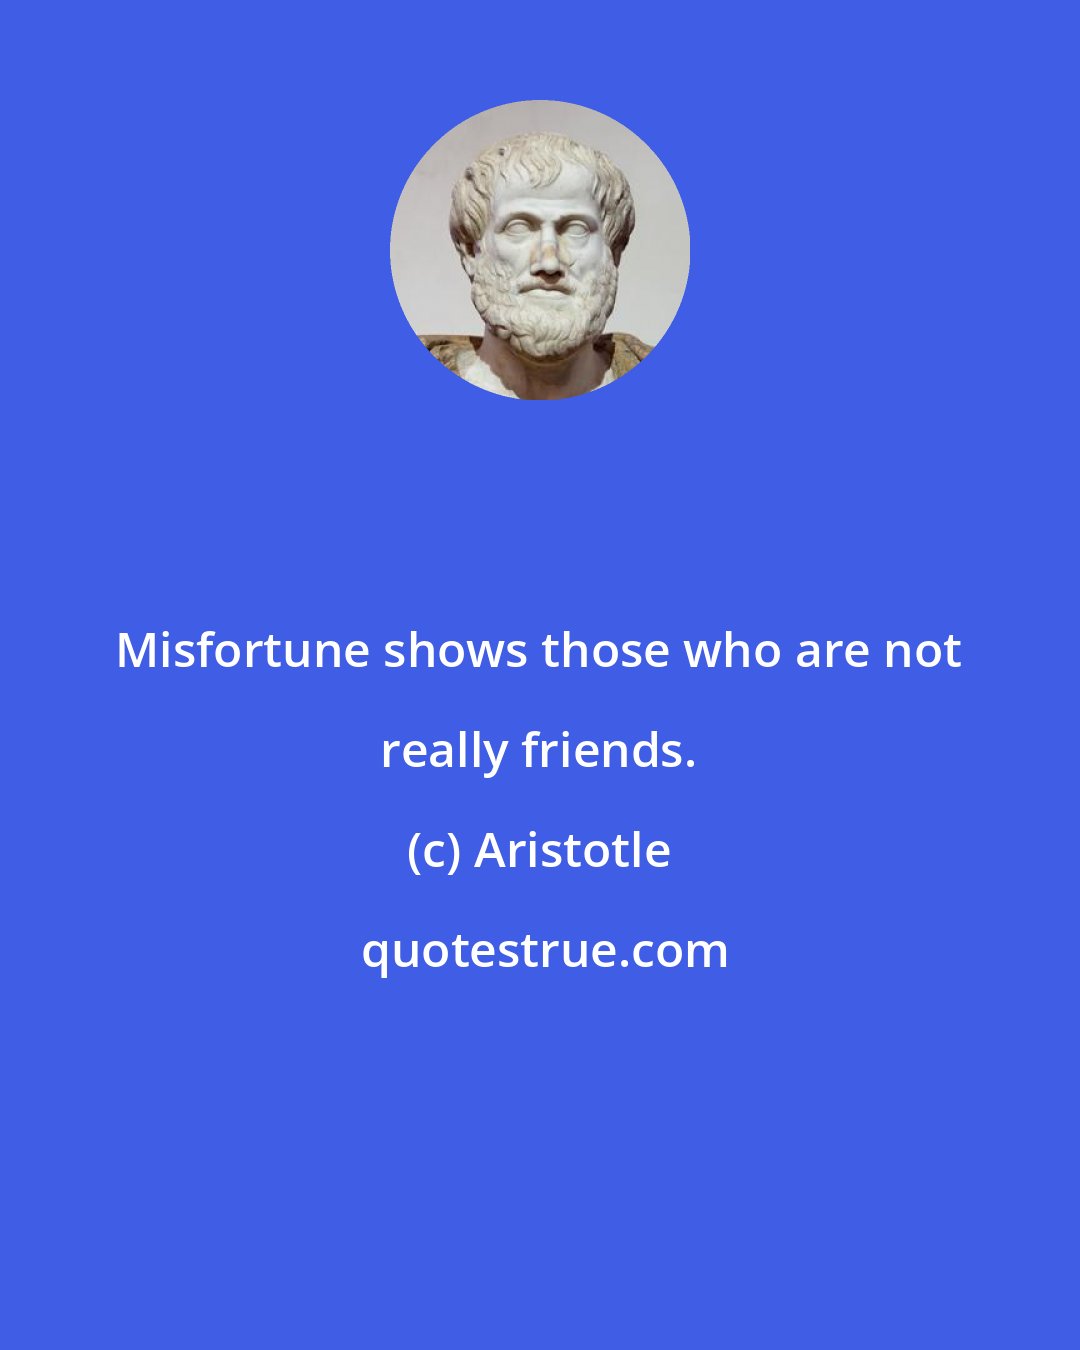 Aristotle: Misfortune shows those who are not really friends.